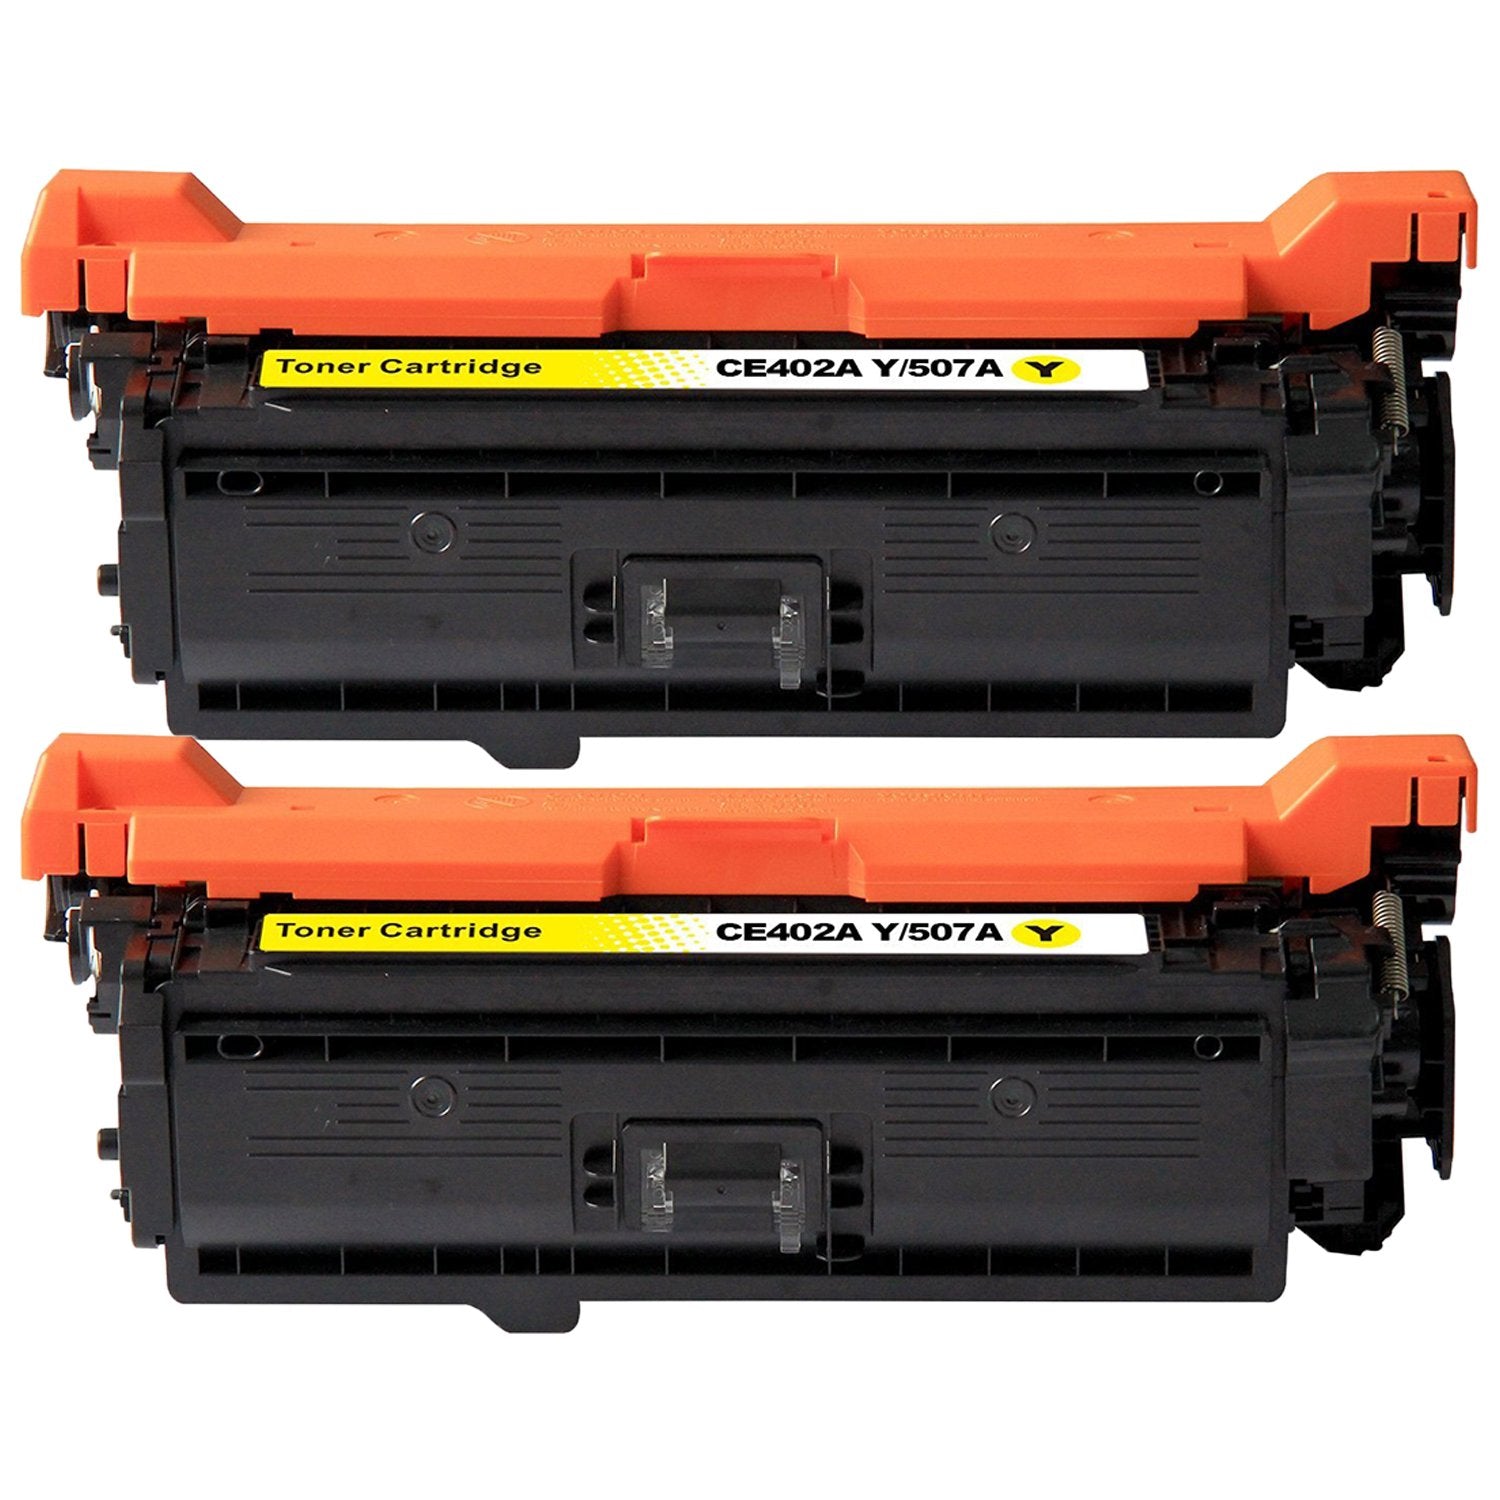 Absolute Toner Compatible CE402A HP 507A Yellow Toner Cartridge | Absolute Toner HP Toner Cartridges